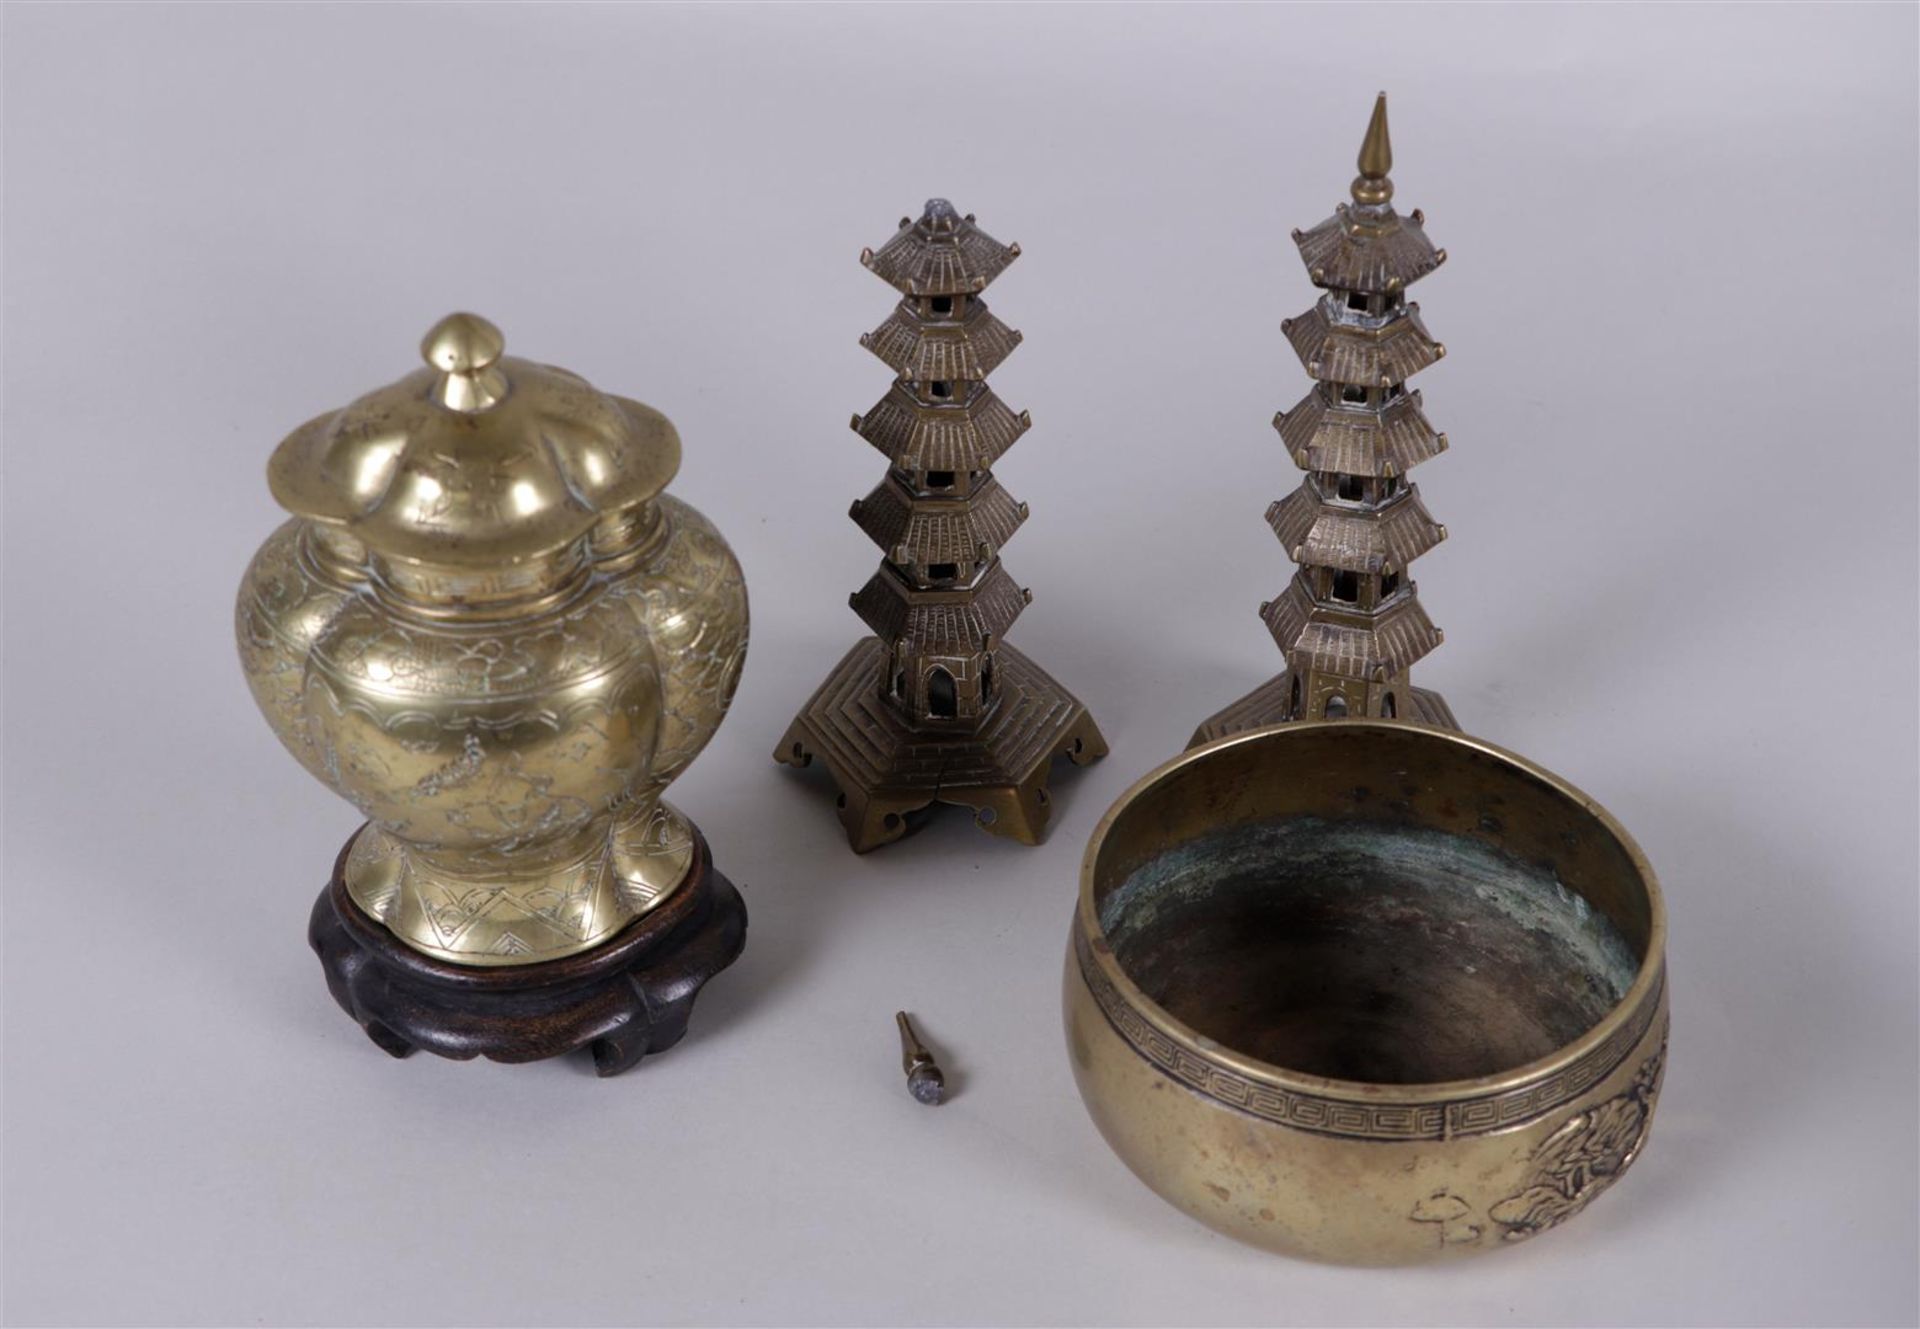 Lot of various copper objects consisting of a lidded vases, a bowl and two Wenchan towers. China, 19